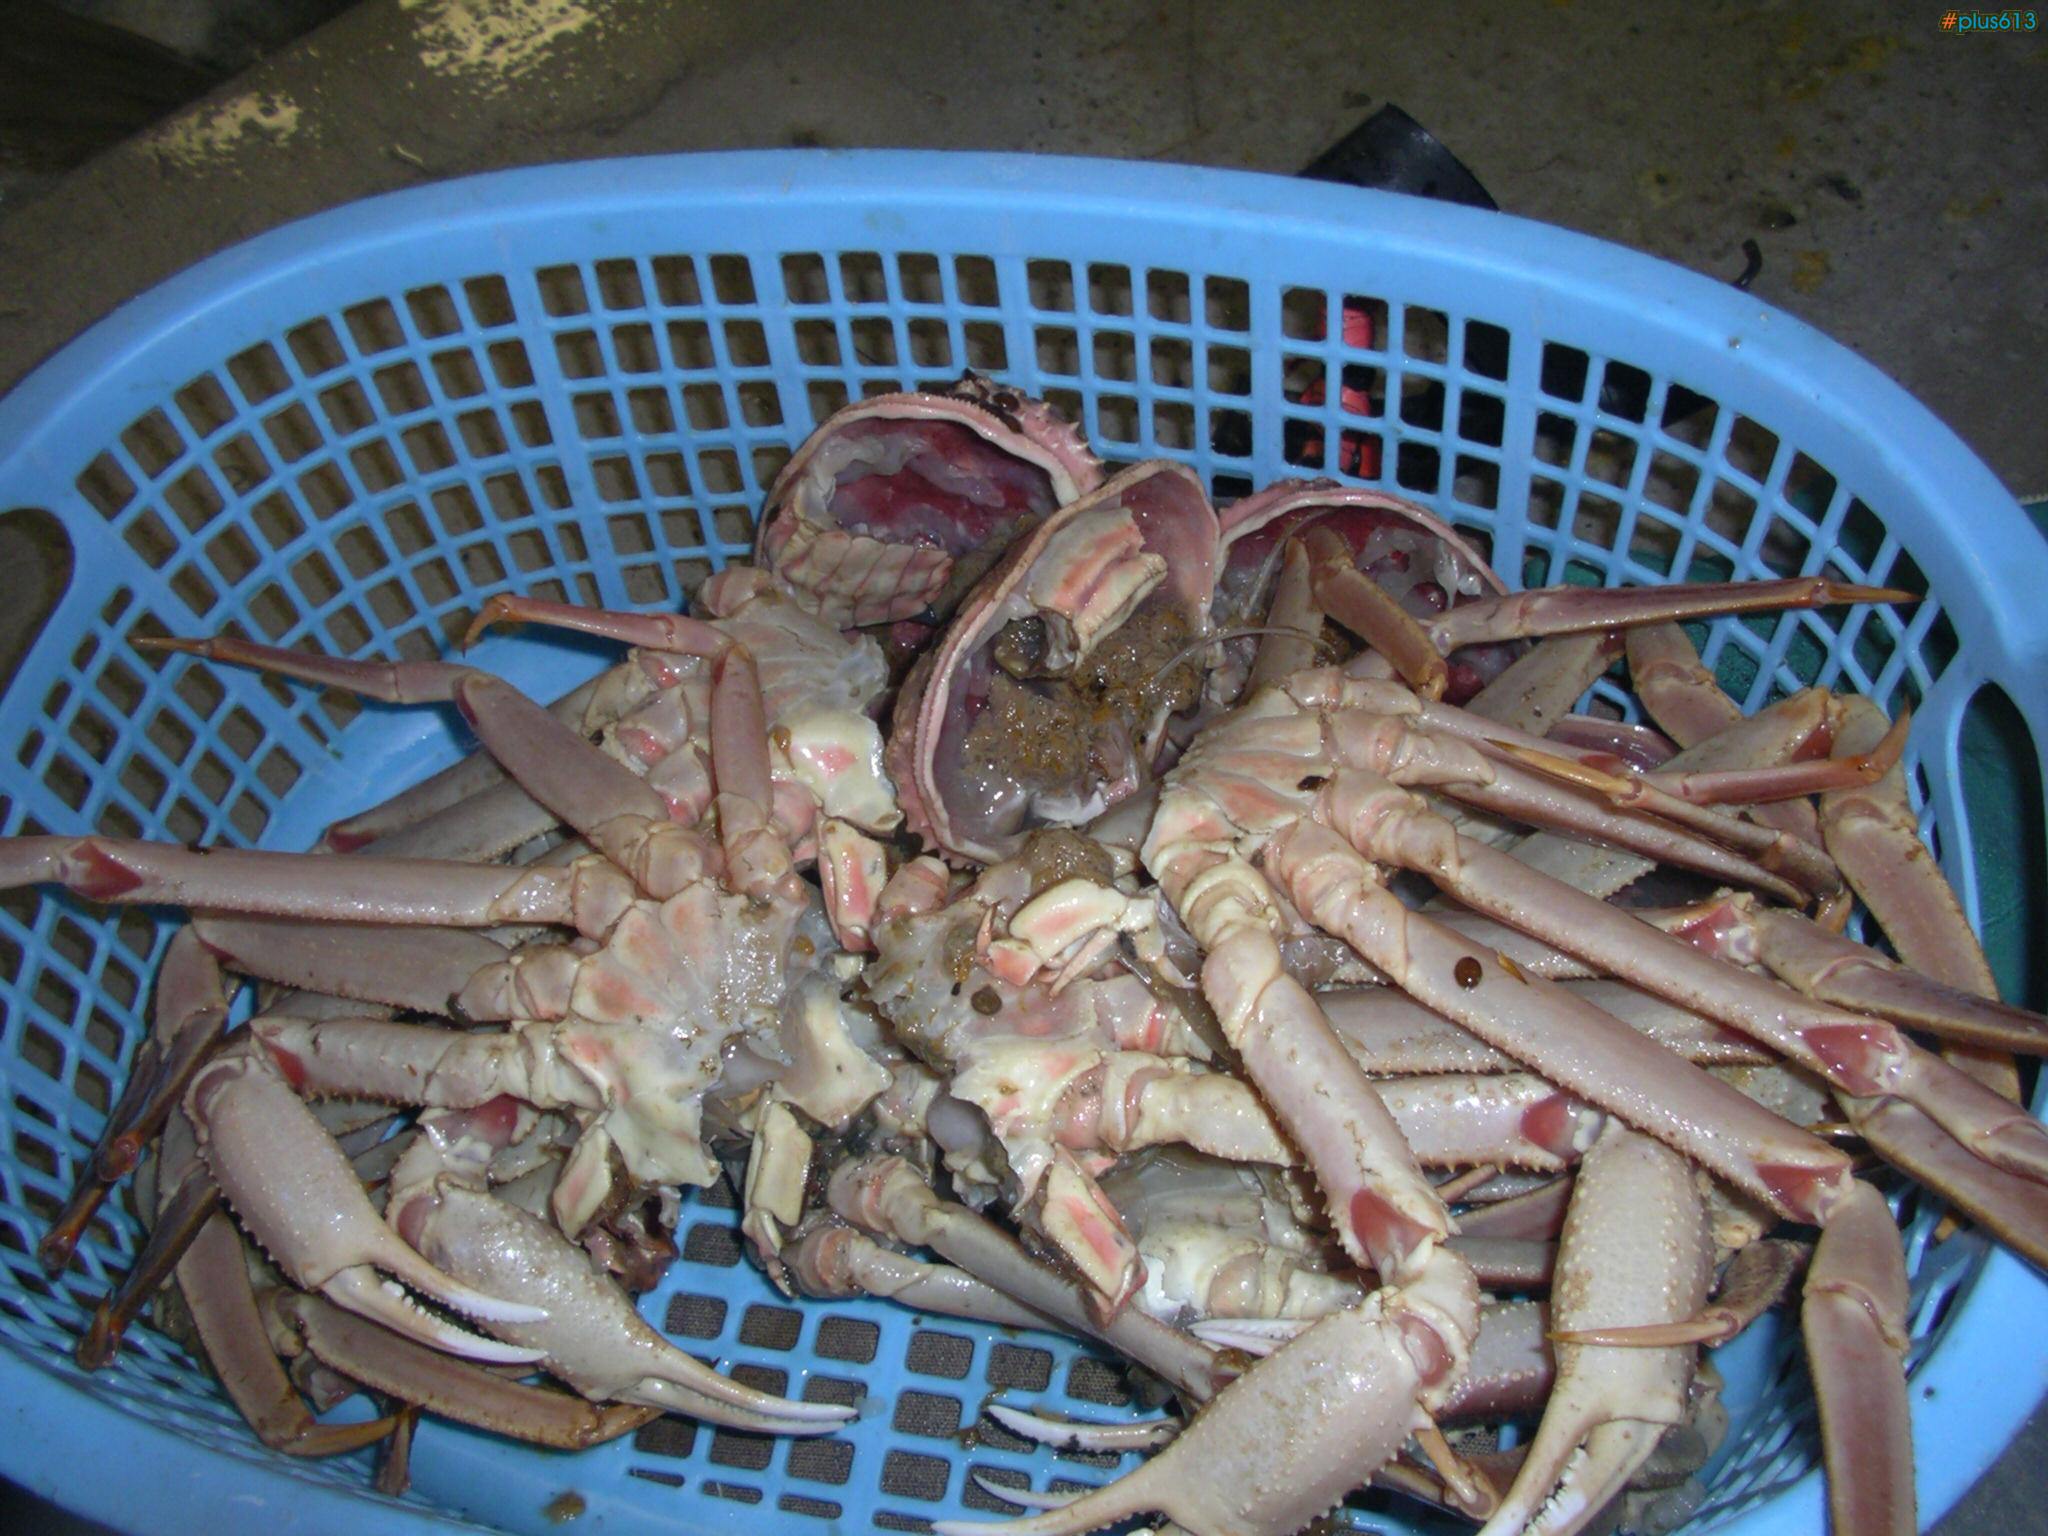 case of the crabs